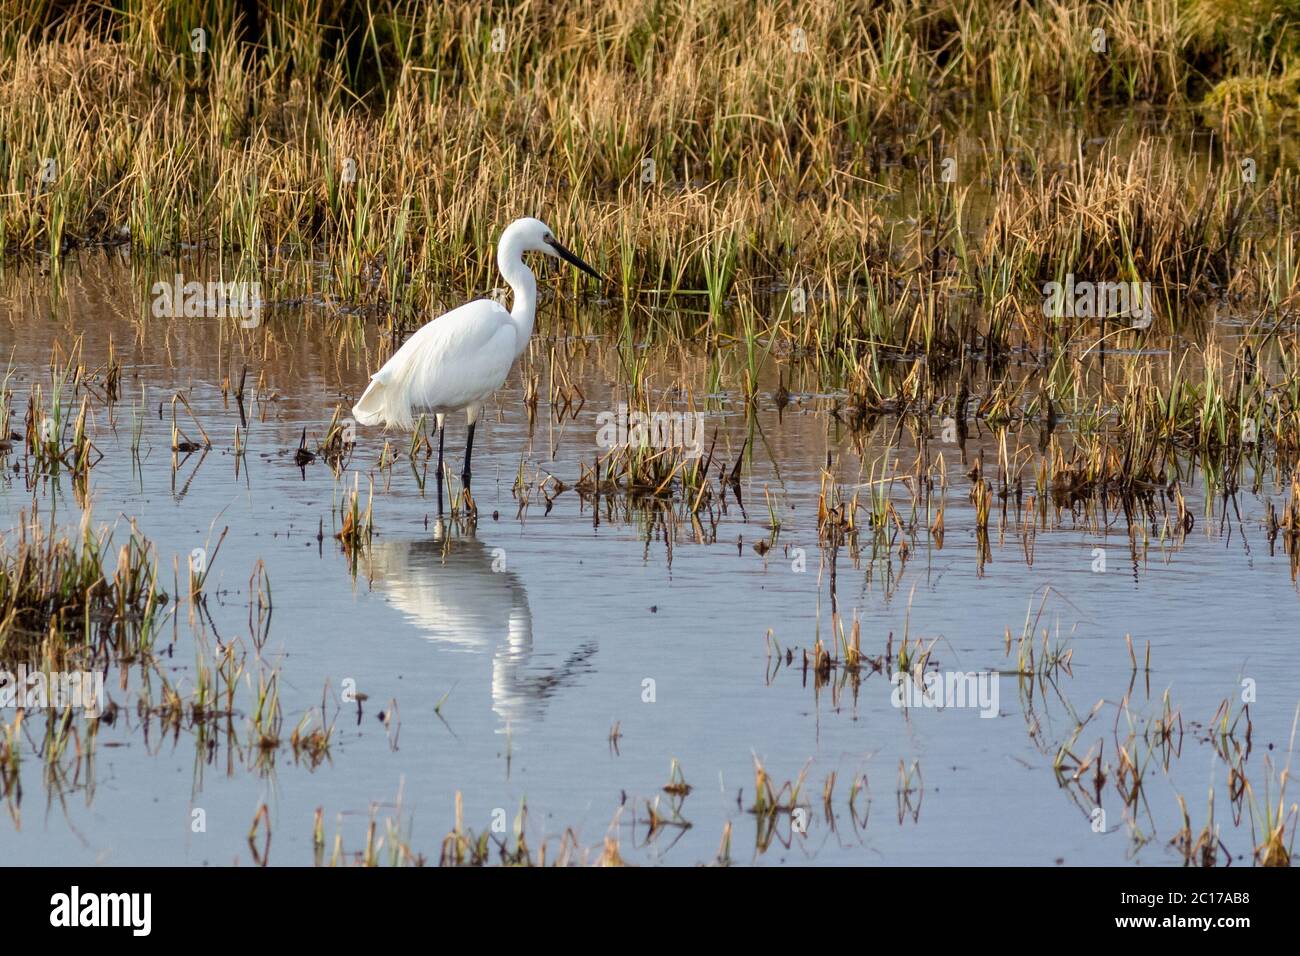 Little Egret Wading in Marshy Ground Reflected in Water Stock Photo